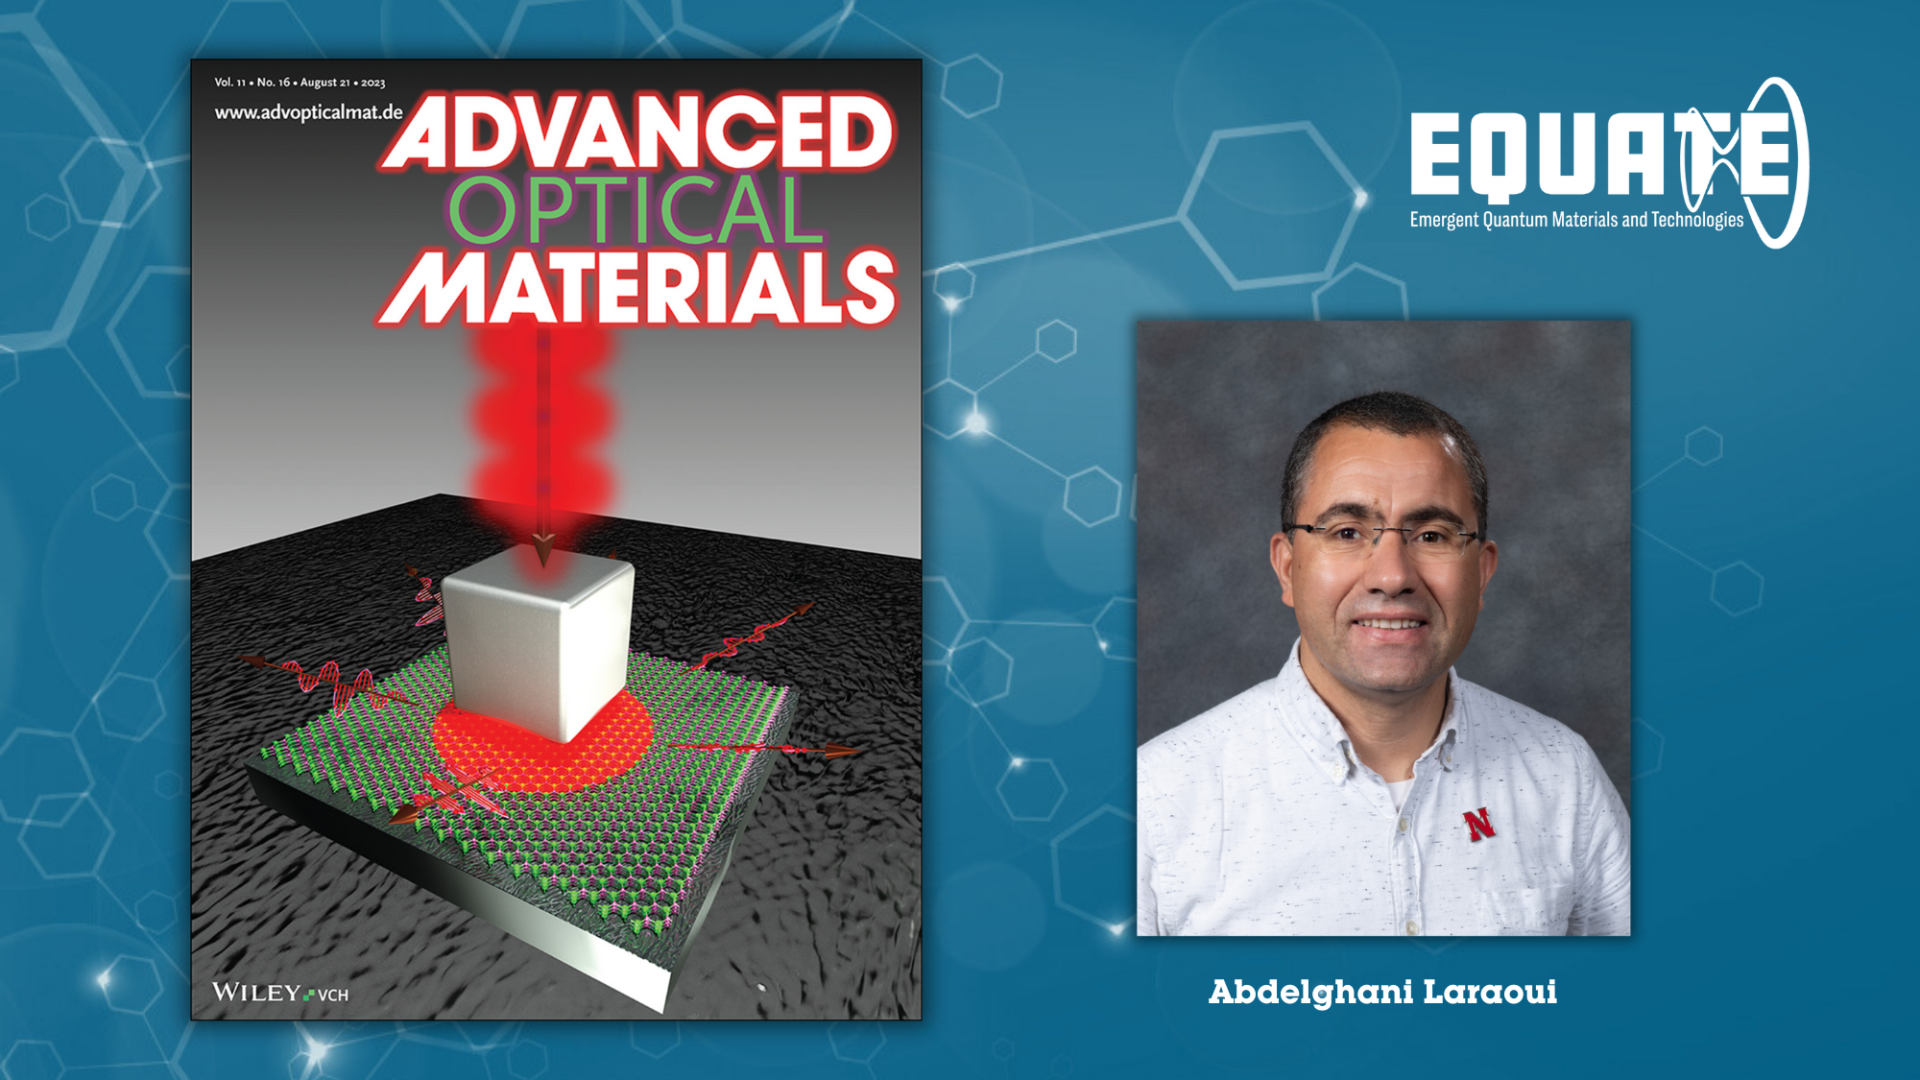 A copy of the back cover image from Advanced Optical Materials is on the right and a photo of the PI, Abdelghani Laraoui, is on the left..